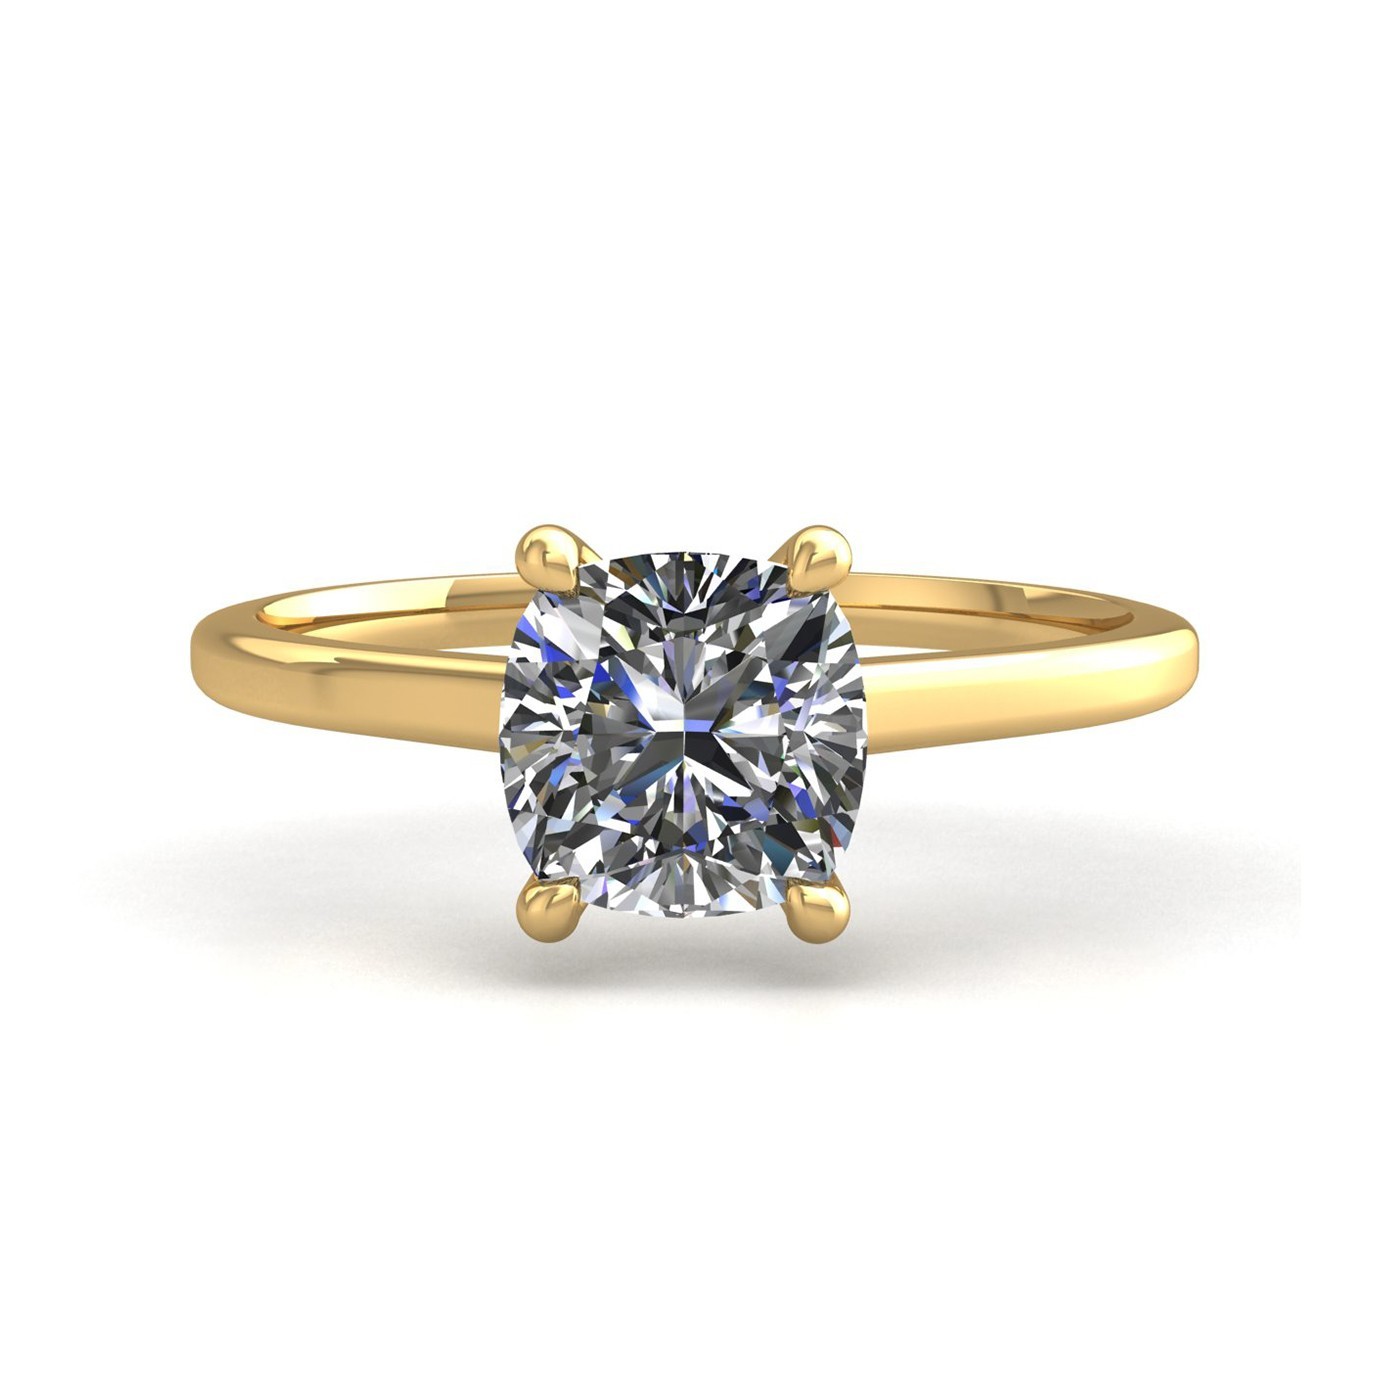 18k yellow gold 1.0ct 4 prongs solitaire cushion cut diamond engagement ring with whisper thin band Photos & images